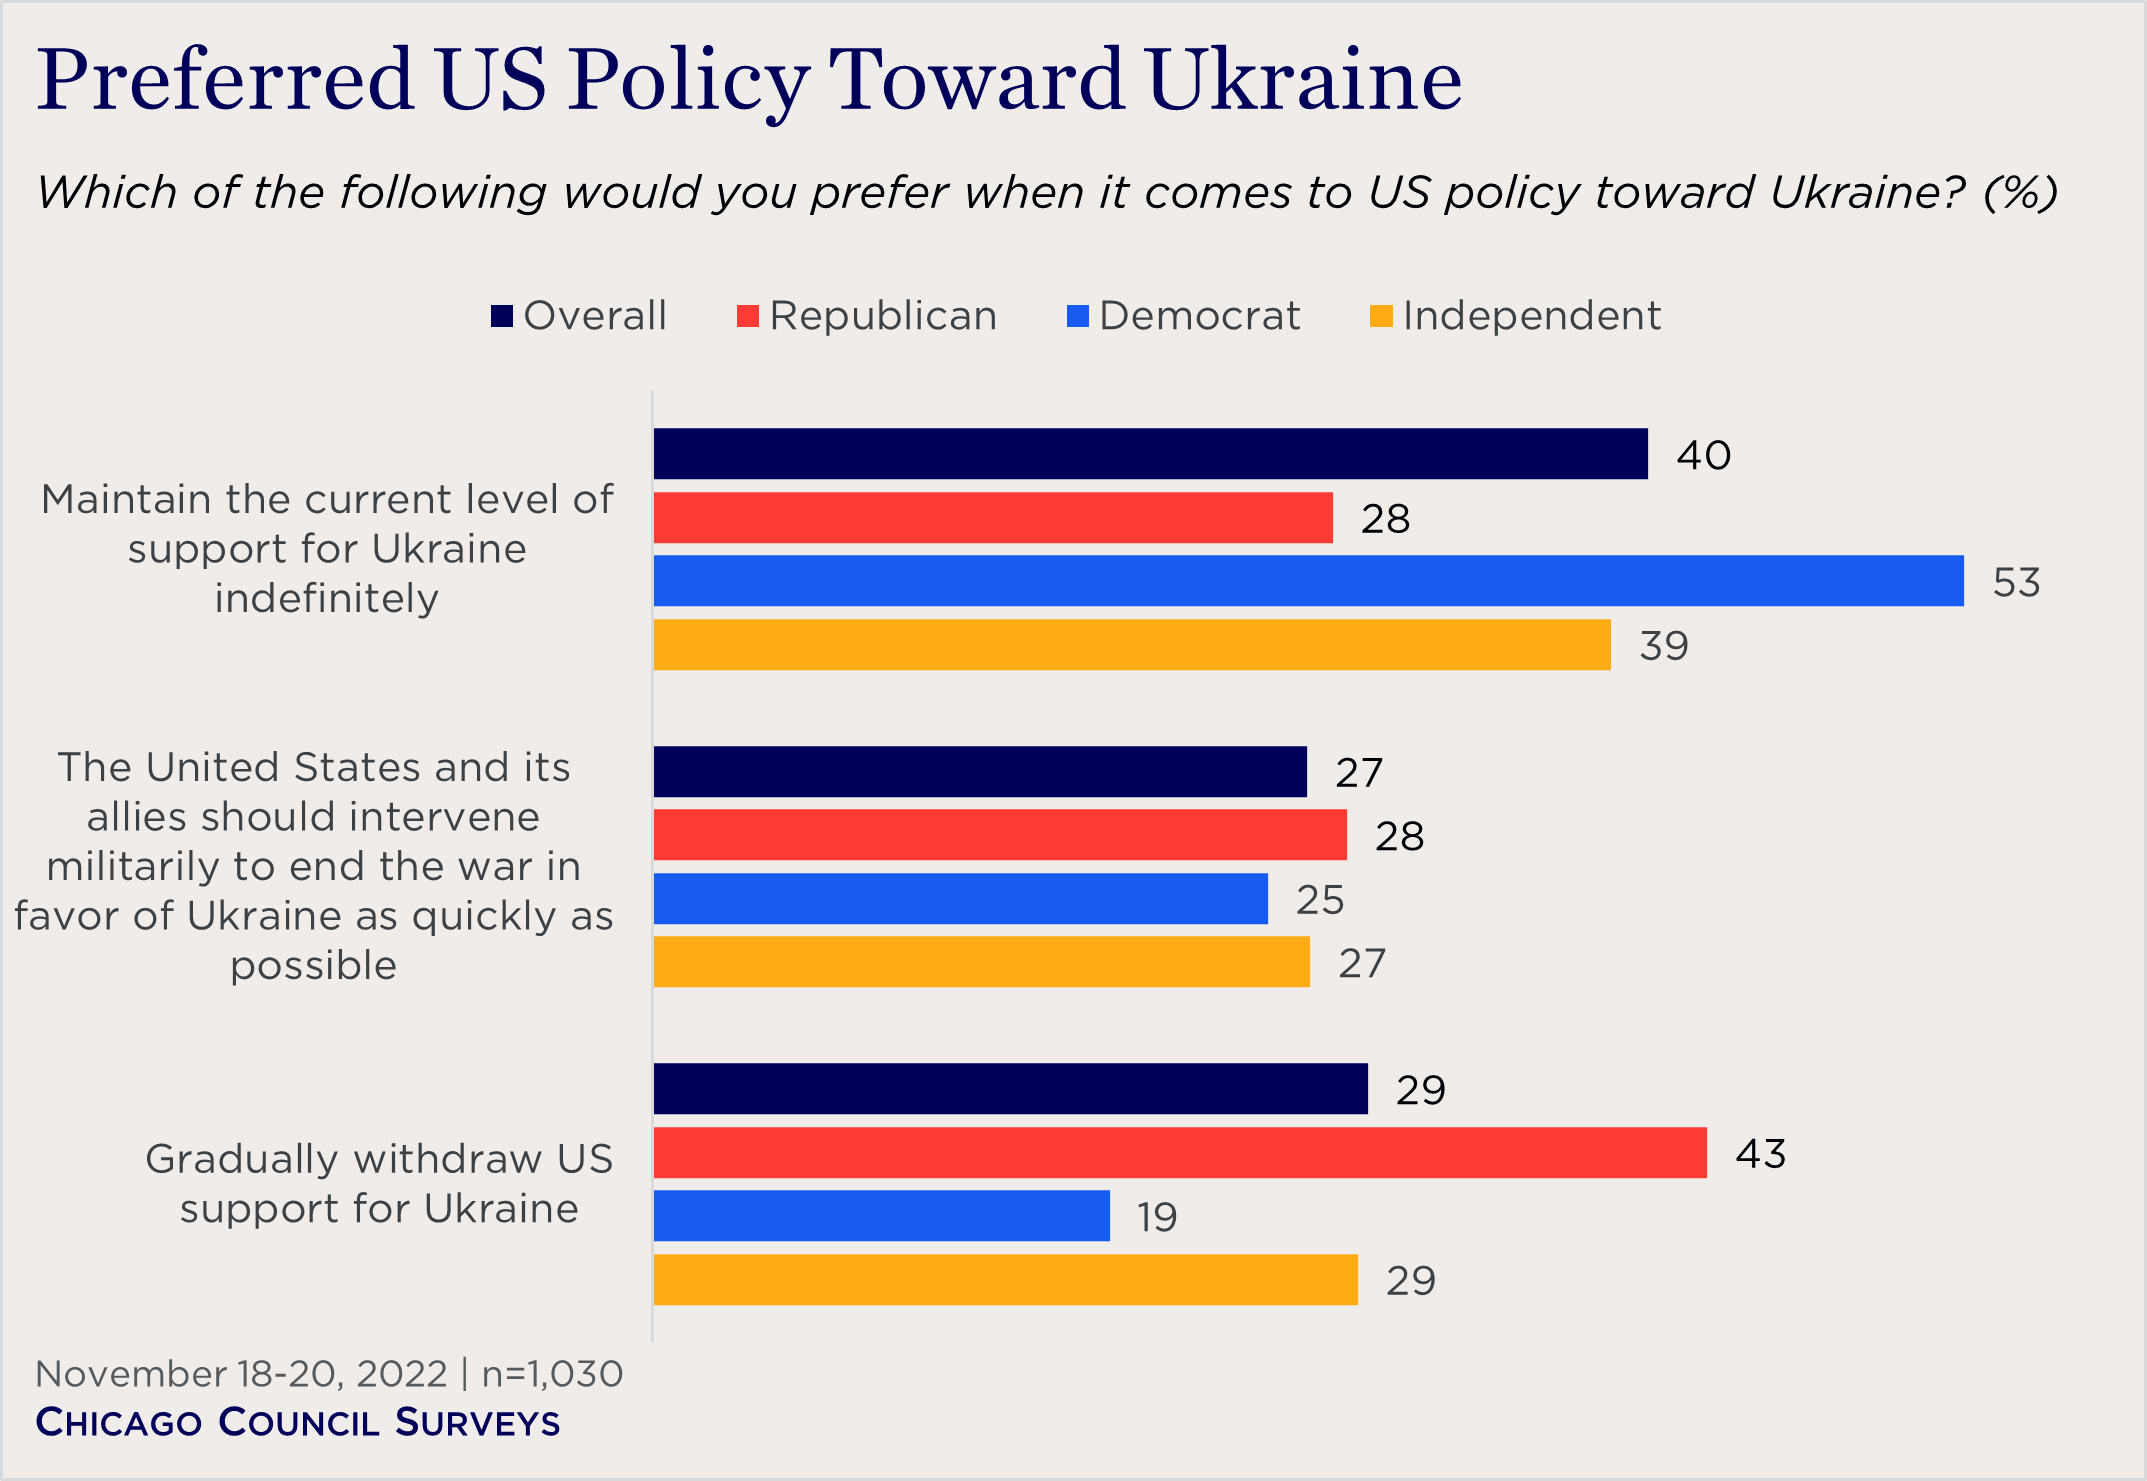 bar chart showing partisan preferences on US policy toward Ukraine